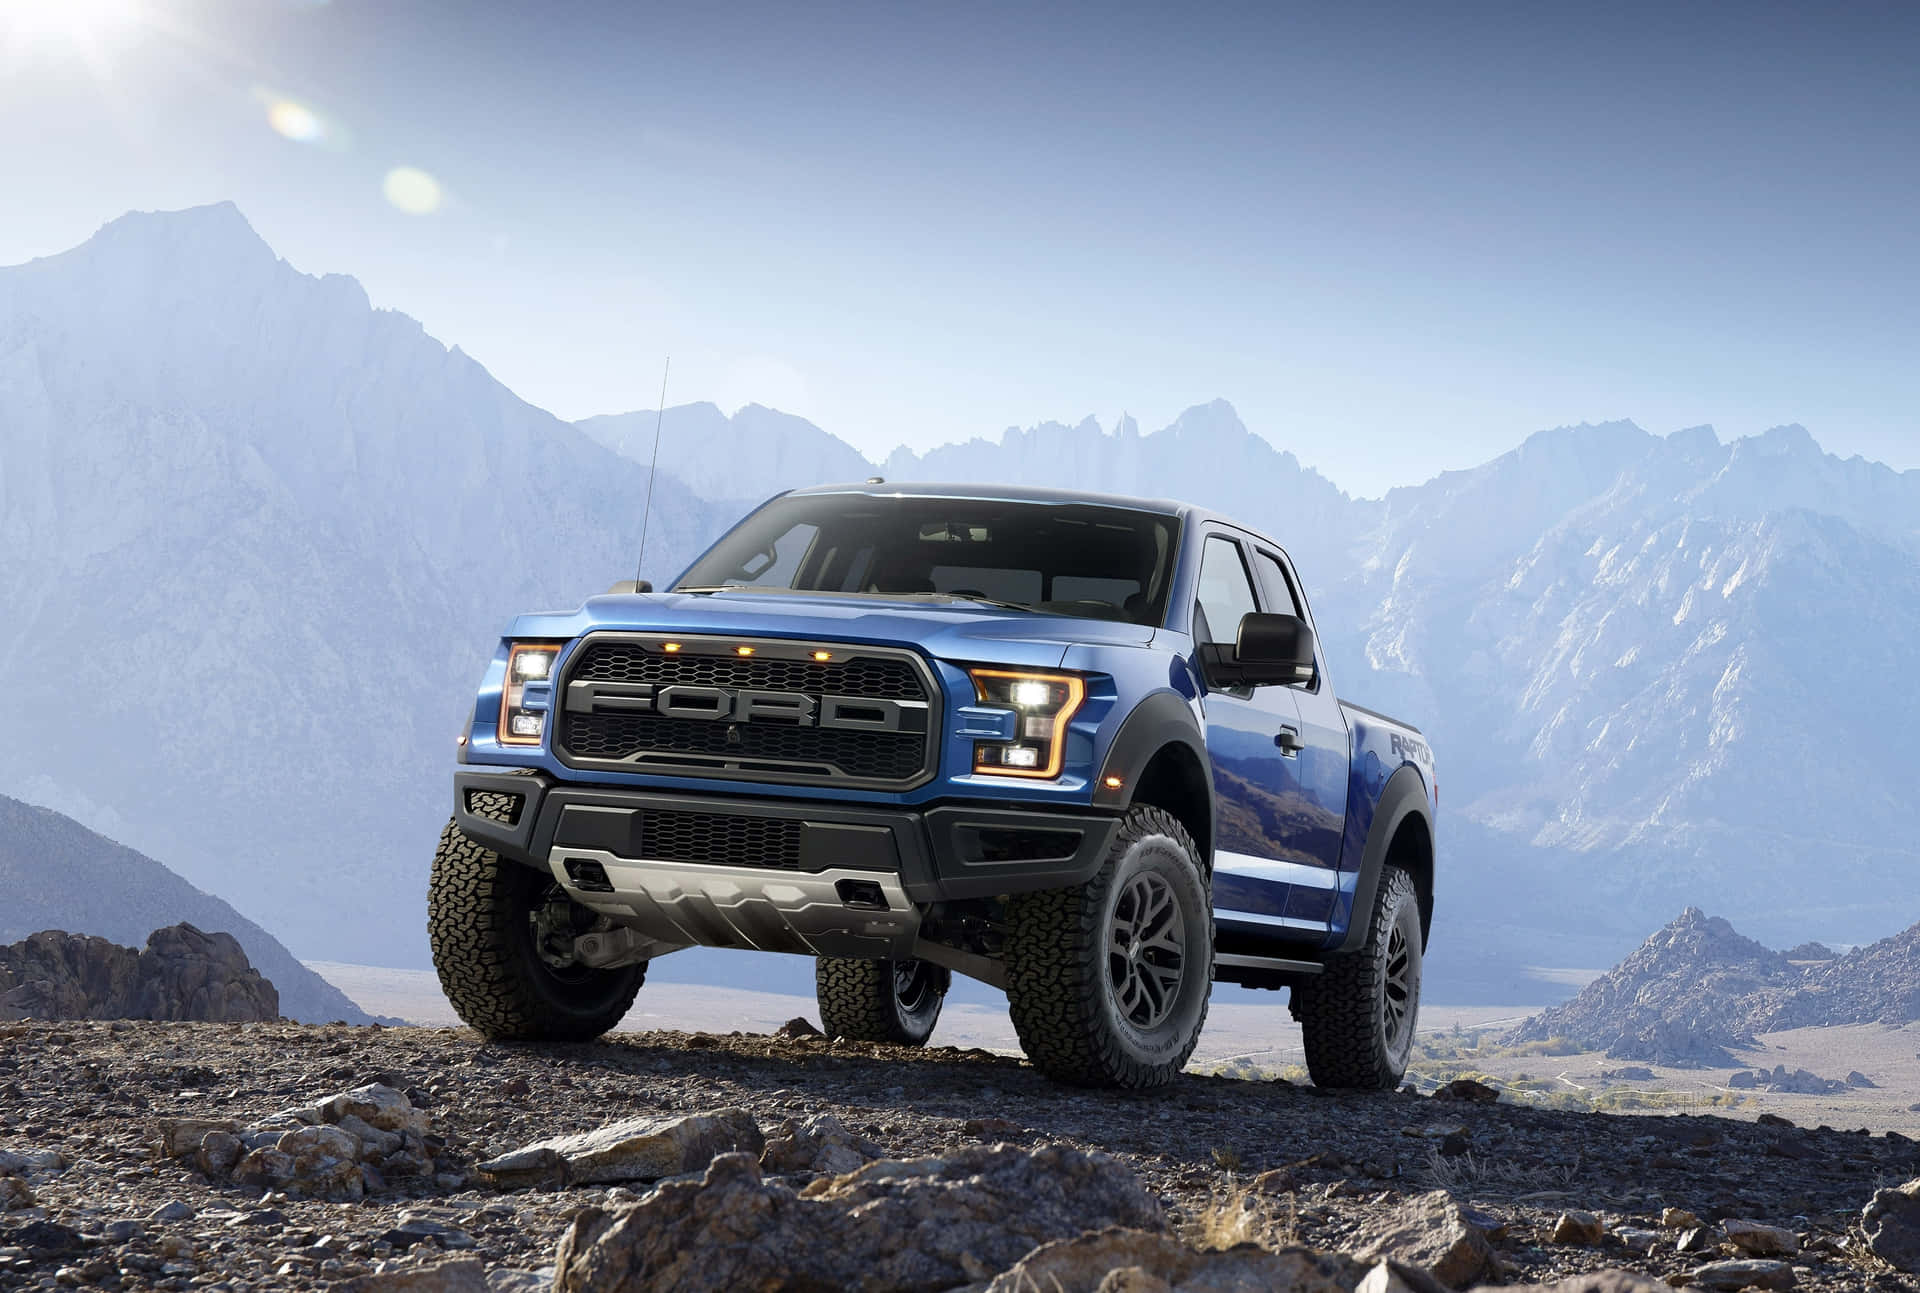 The Ford F-150 Pick-up - Ready to Take on Any Adrenaline Adventure